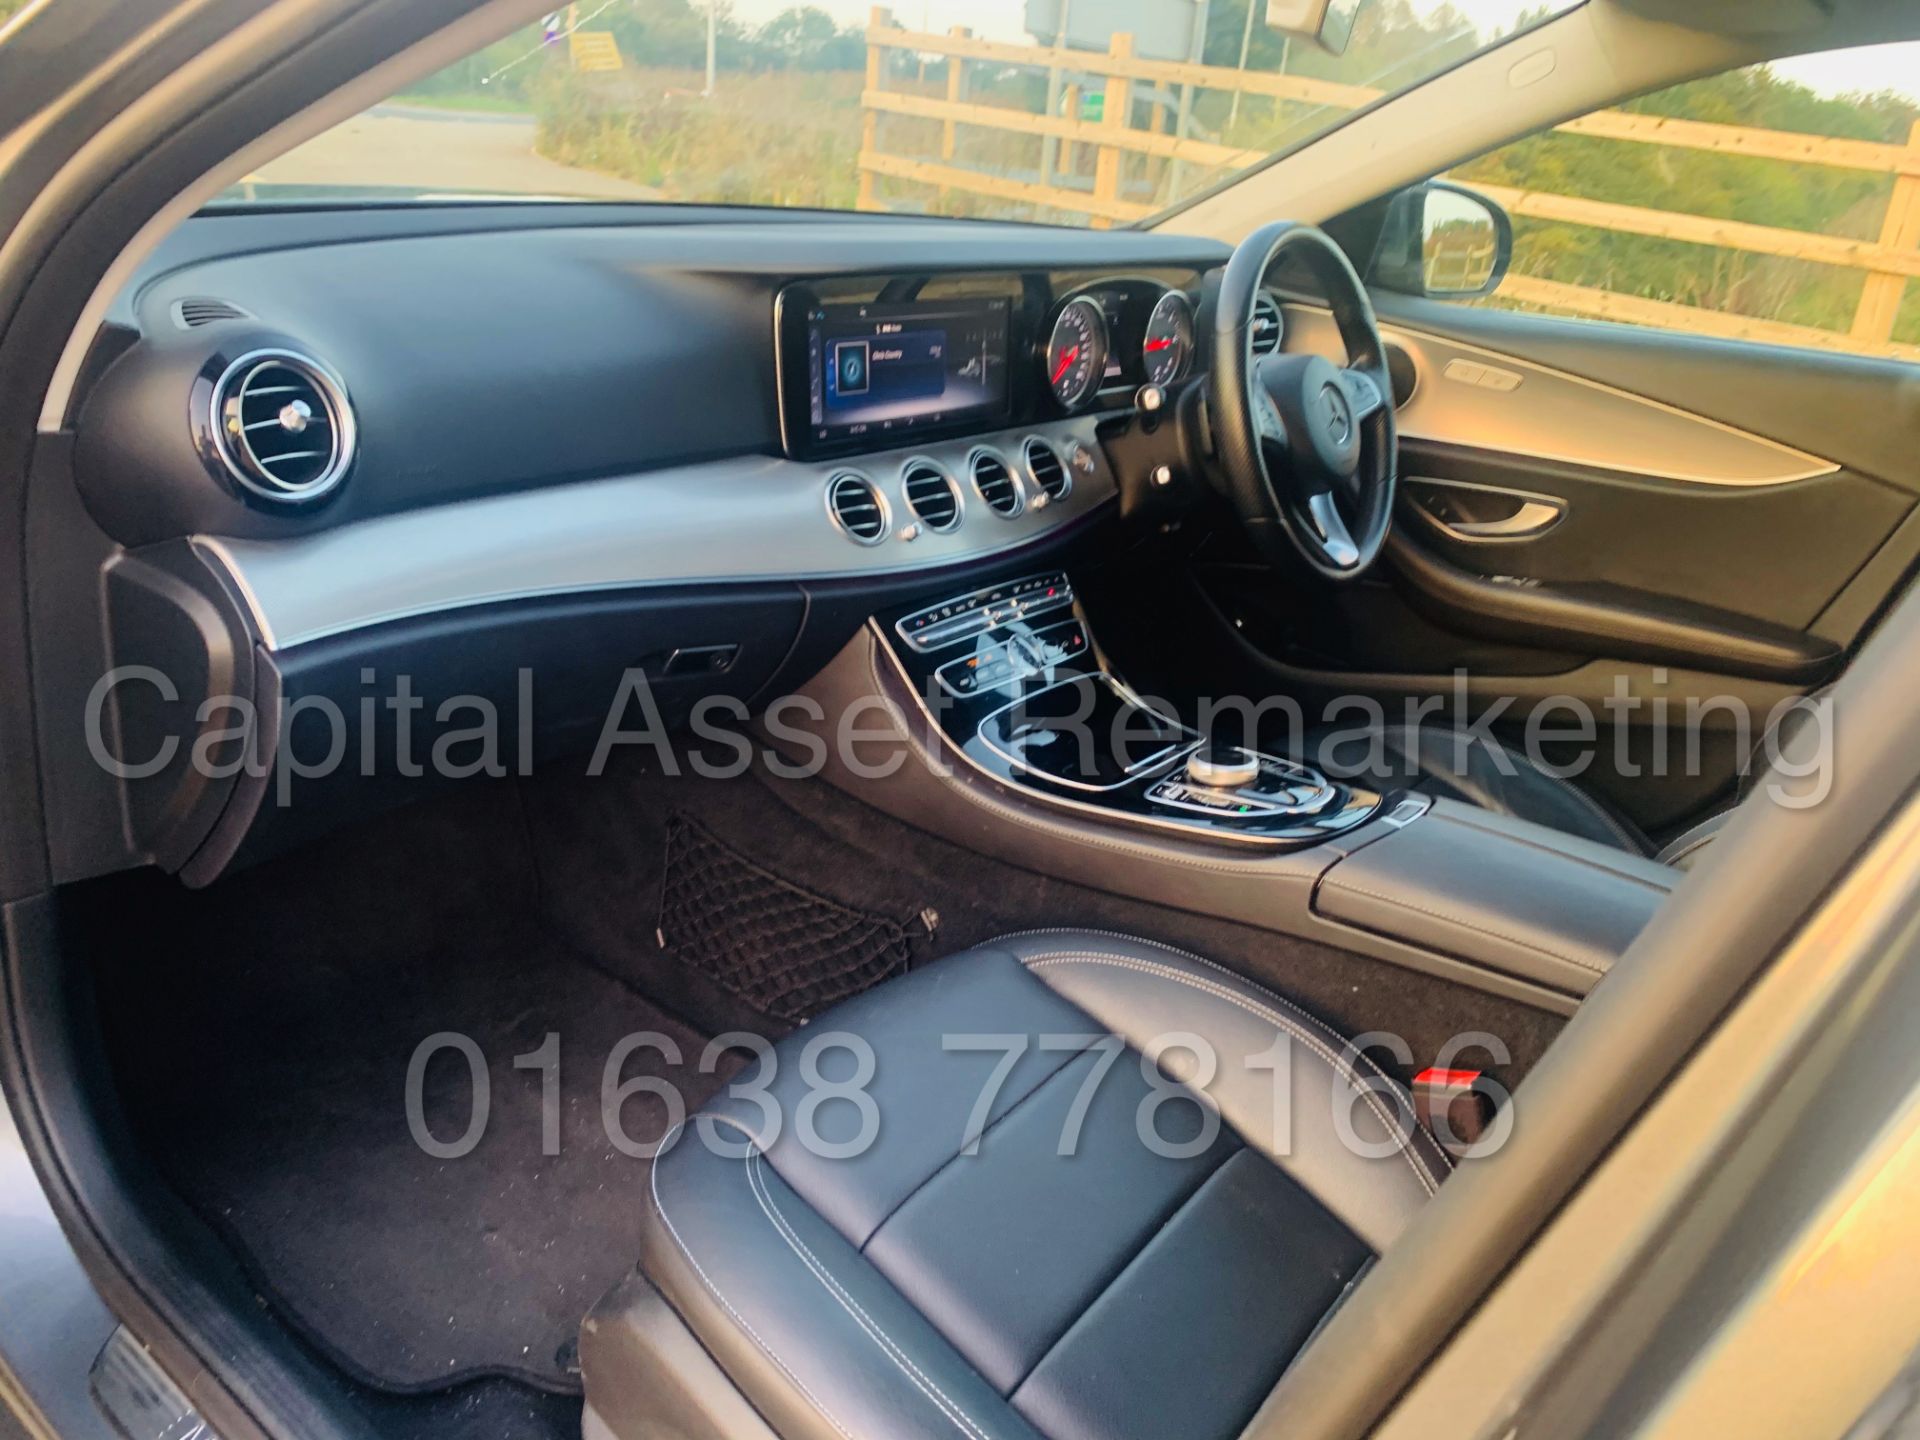 (On Sale) MERCEDES-BENZ E220D *SALOON* (2018 - NEW MODEL) '9-G TRONIC AUTO - LEATHER - SAT NAV' - Image 22 of 53